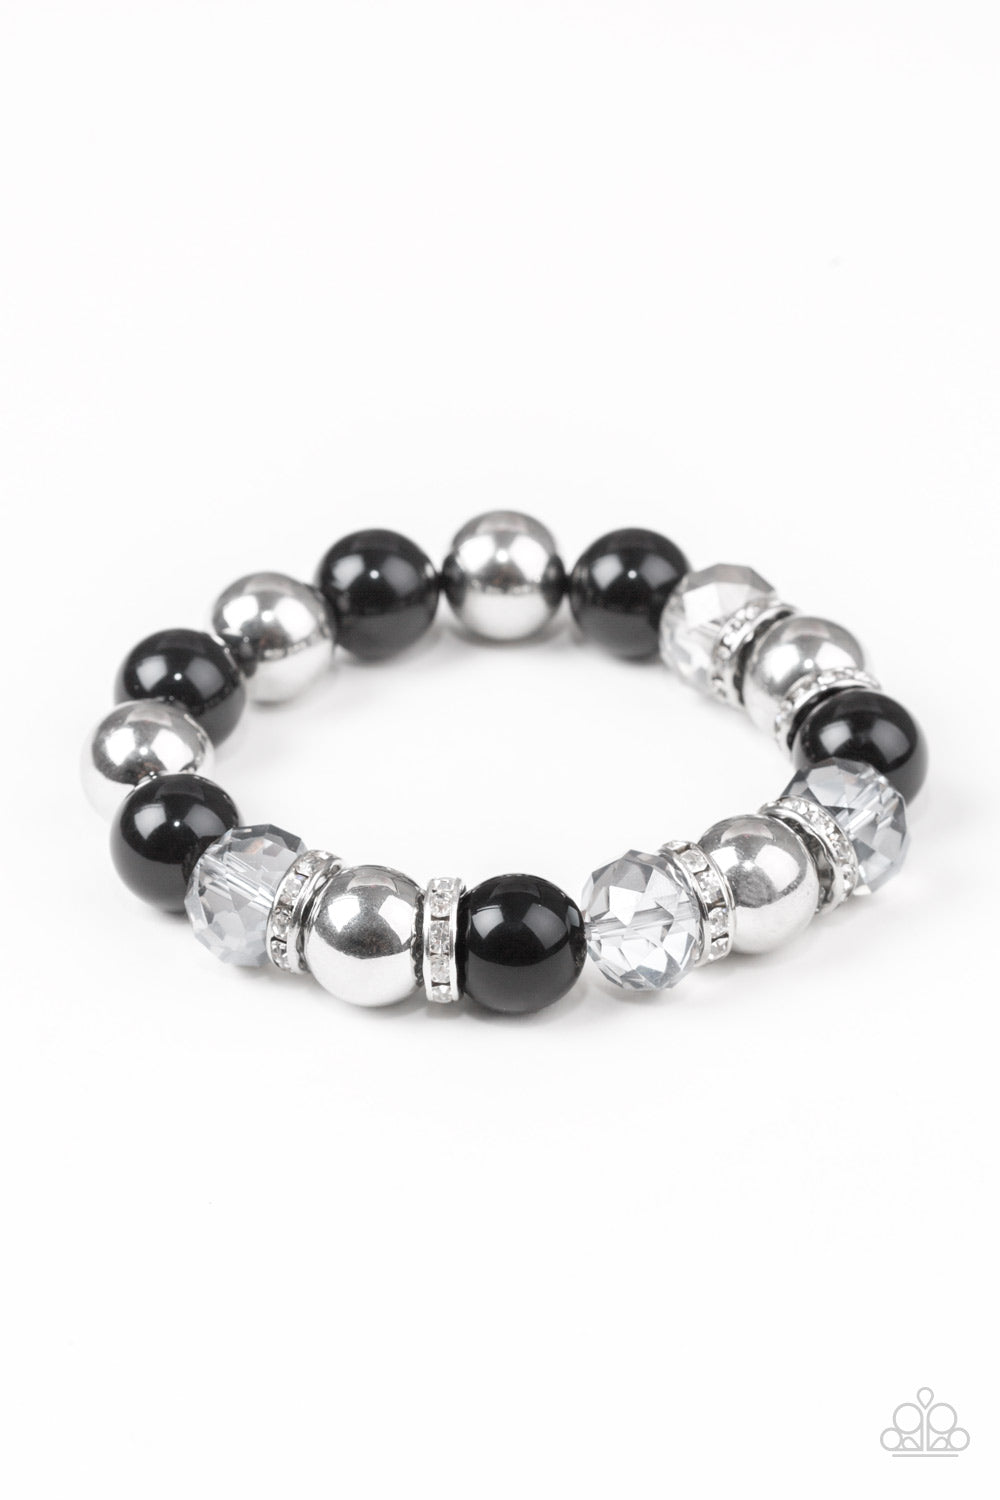 Camera Chic Black Bracelets Paparazzi Accessories. Get Free Shipping. #P9RE-BKXX-212GH. $5 jewelry